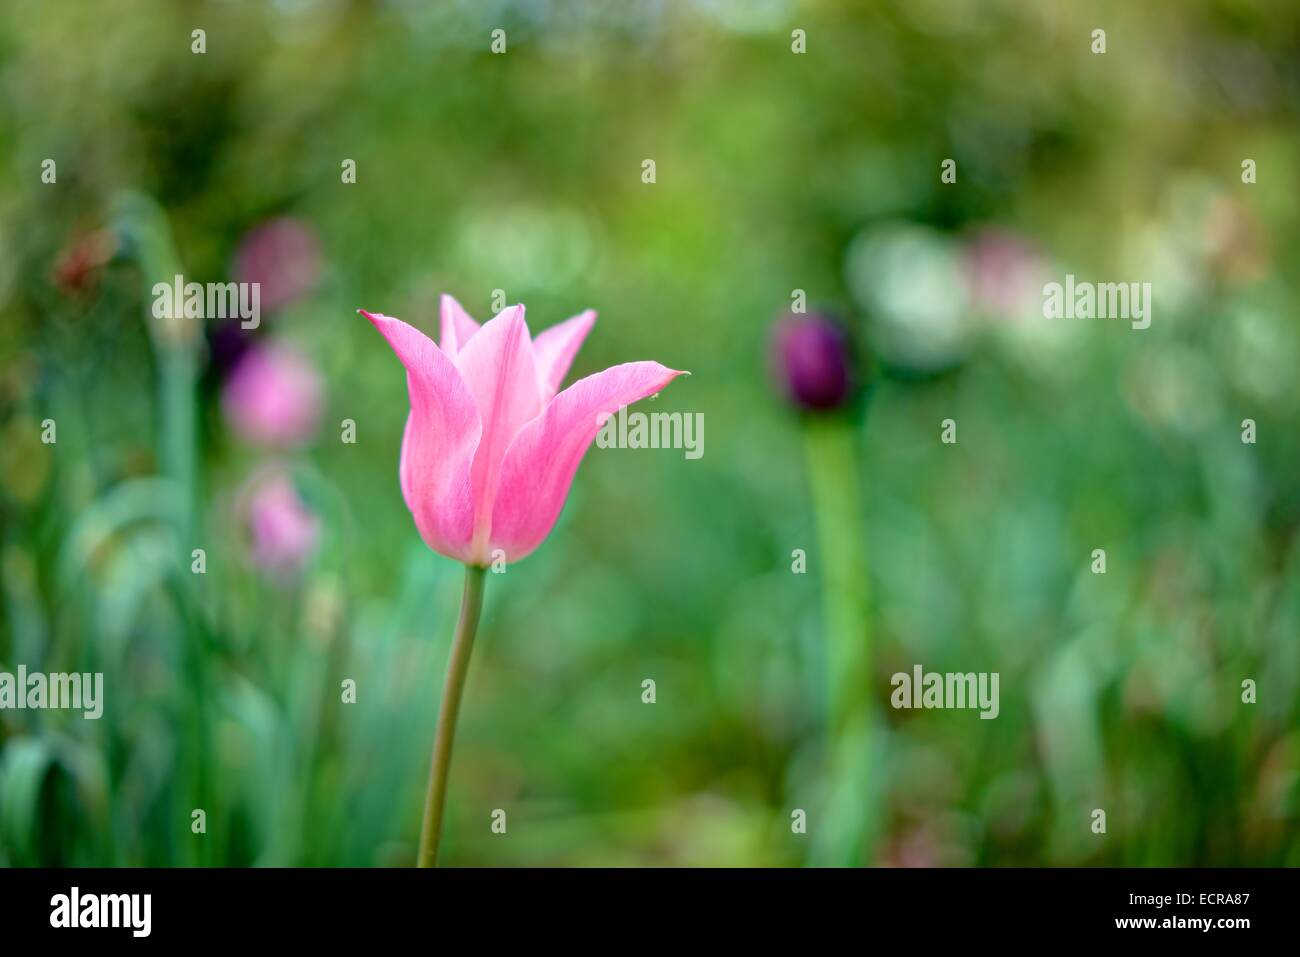 A single elegant pink Tulip isolated against a blurred background of a mainly green leaf spring garden. Stock Photo